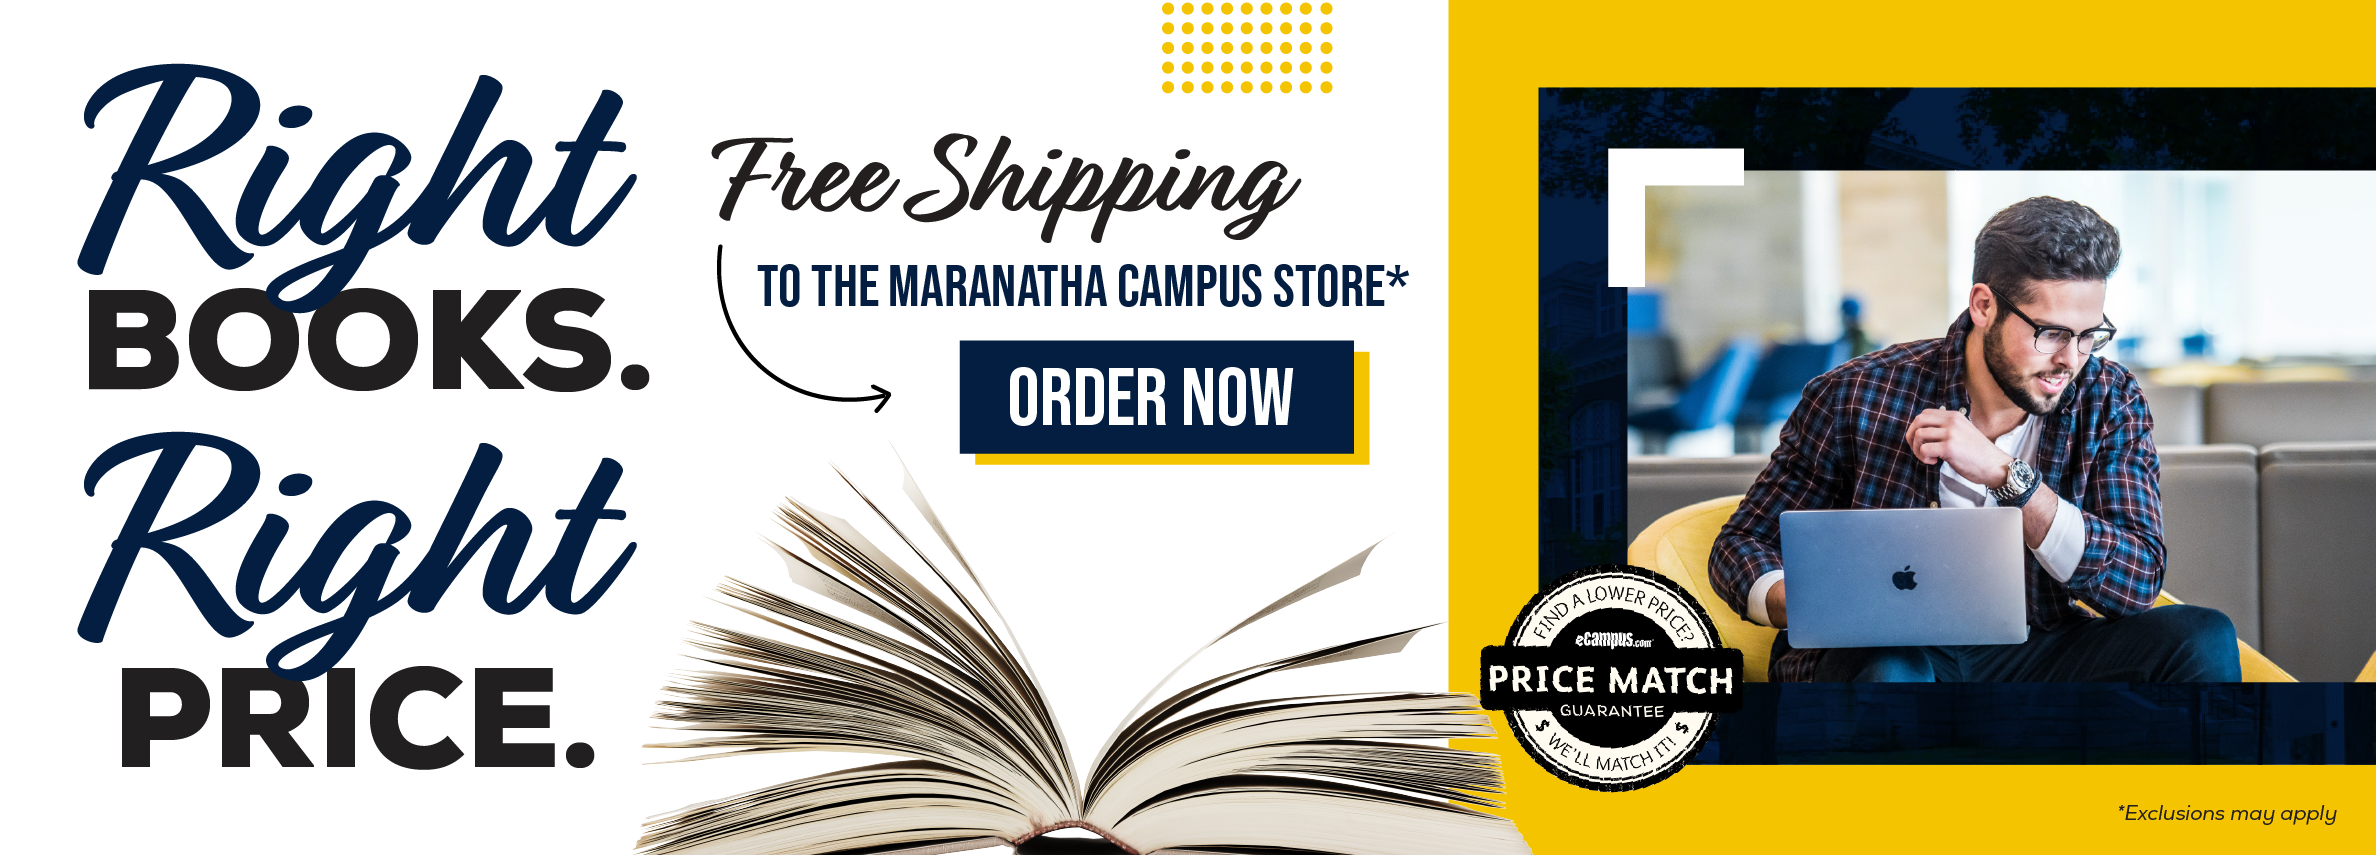 Right books. Right price. Free shipping to the Maranatha Campus Store.* Order now. Price Match Guarantee. *Exclusions may apply.